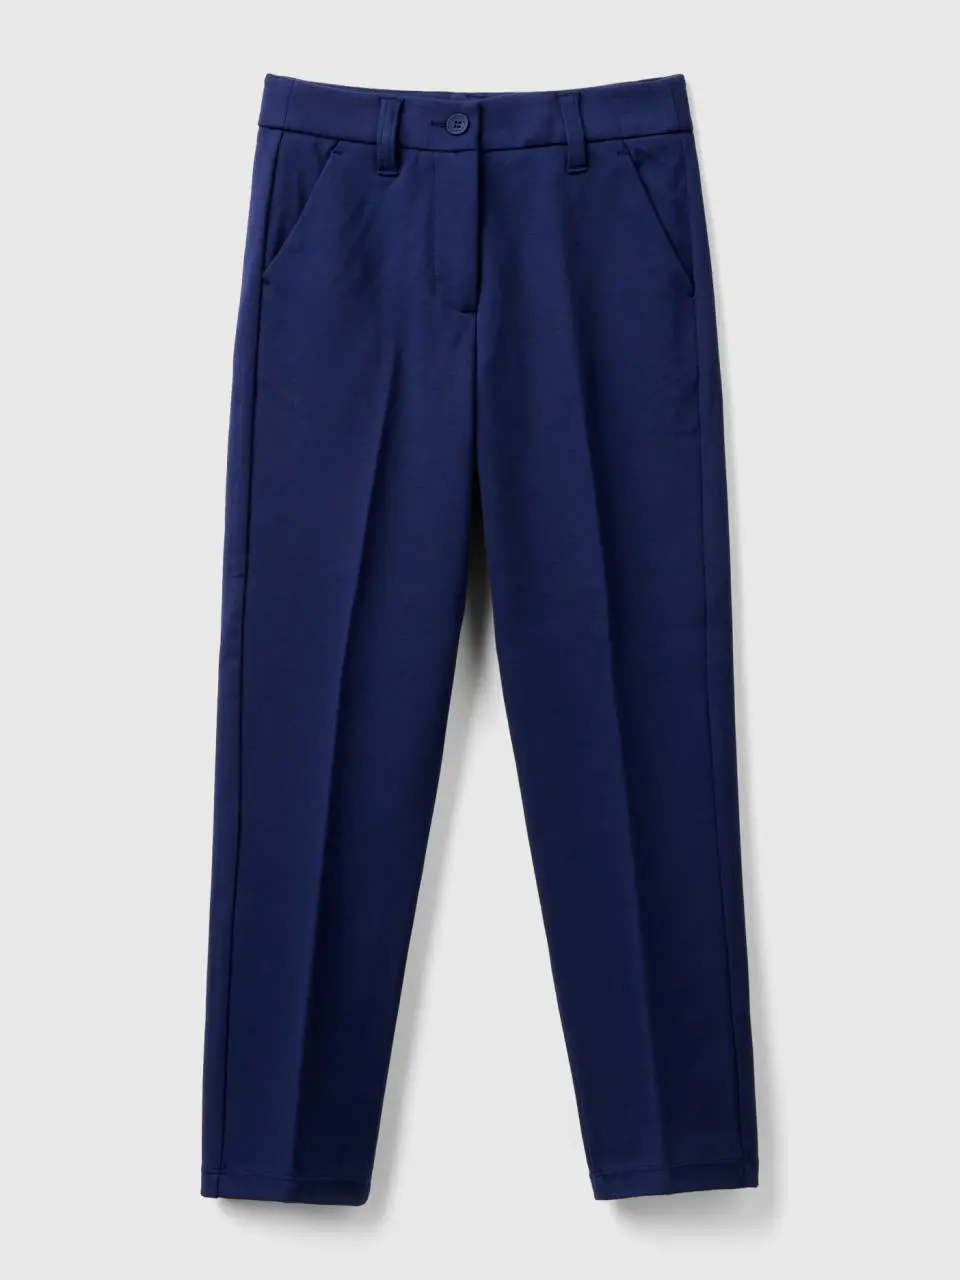 Benetton slim fit trousers in viscose blend. 1